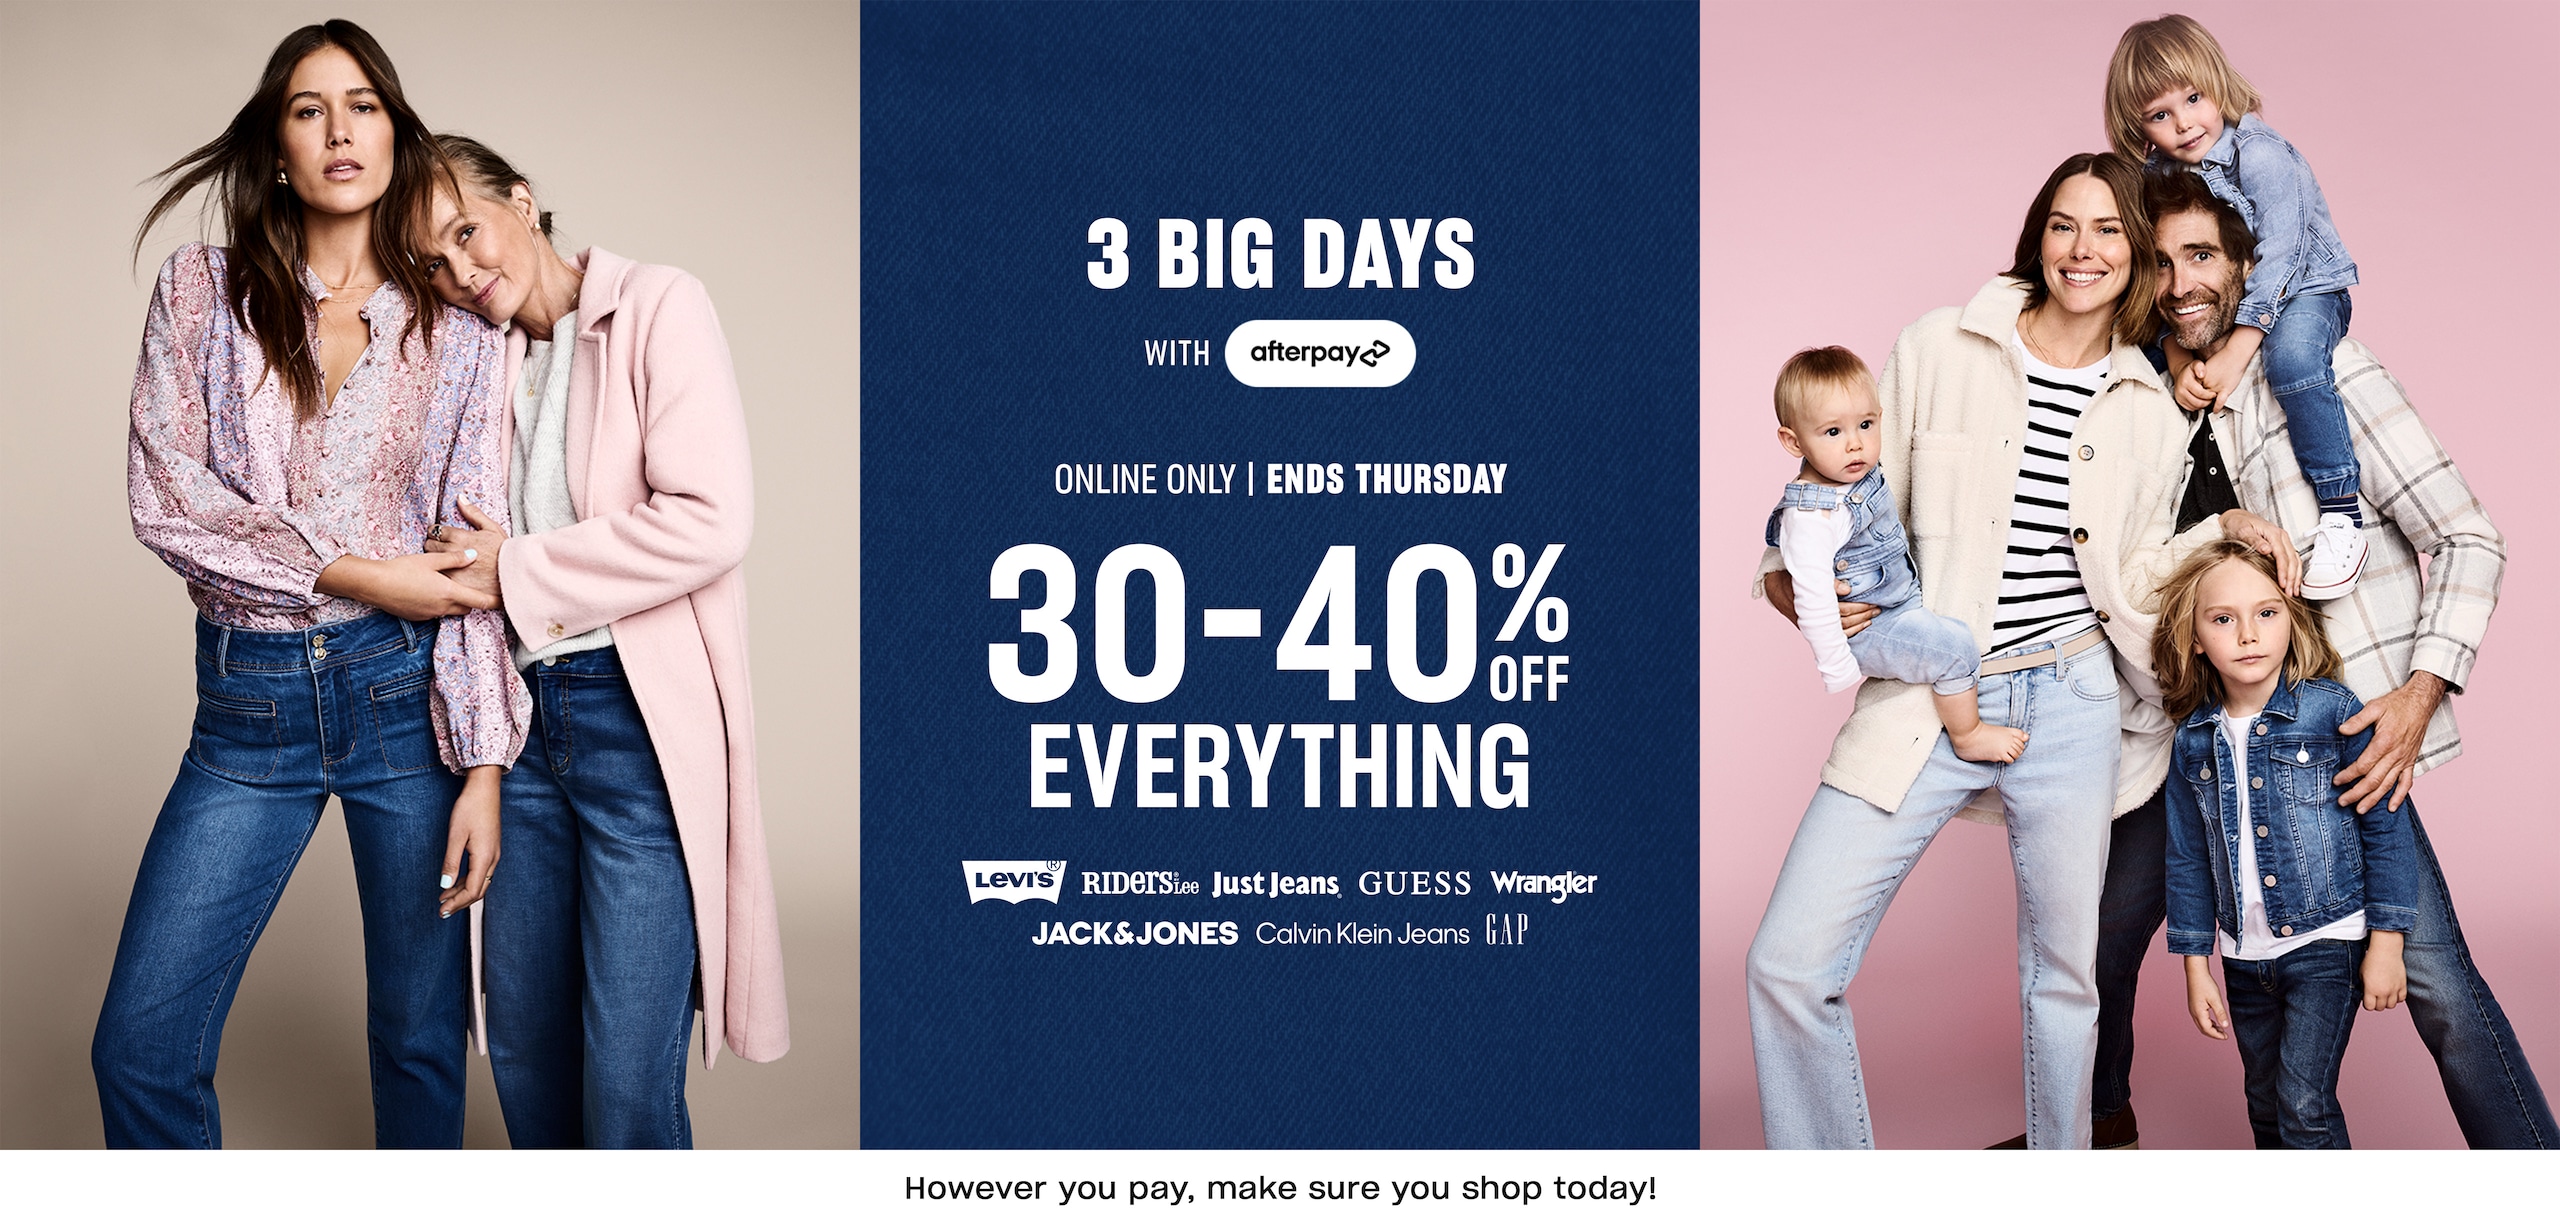 Shop for every Jean-eration with Afterpay. 30-40% off everything. And however you pay, make sure you shop today.